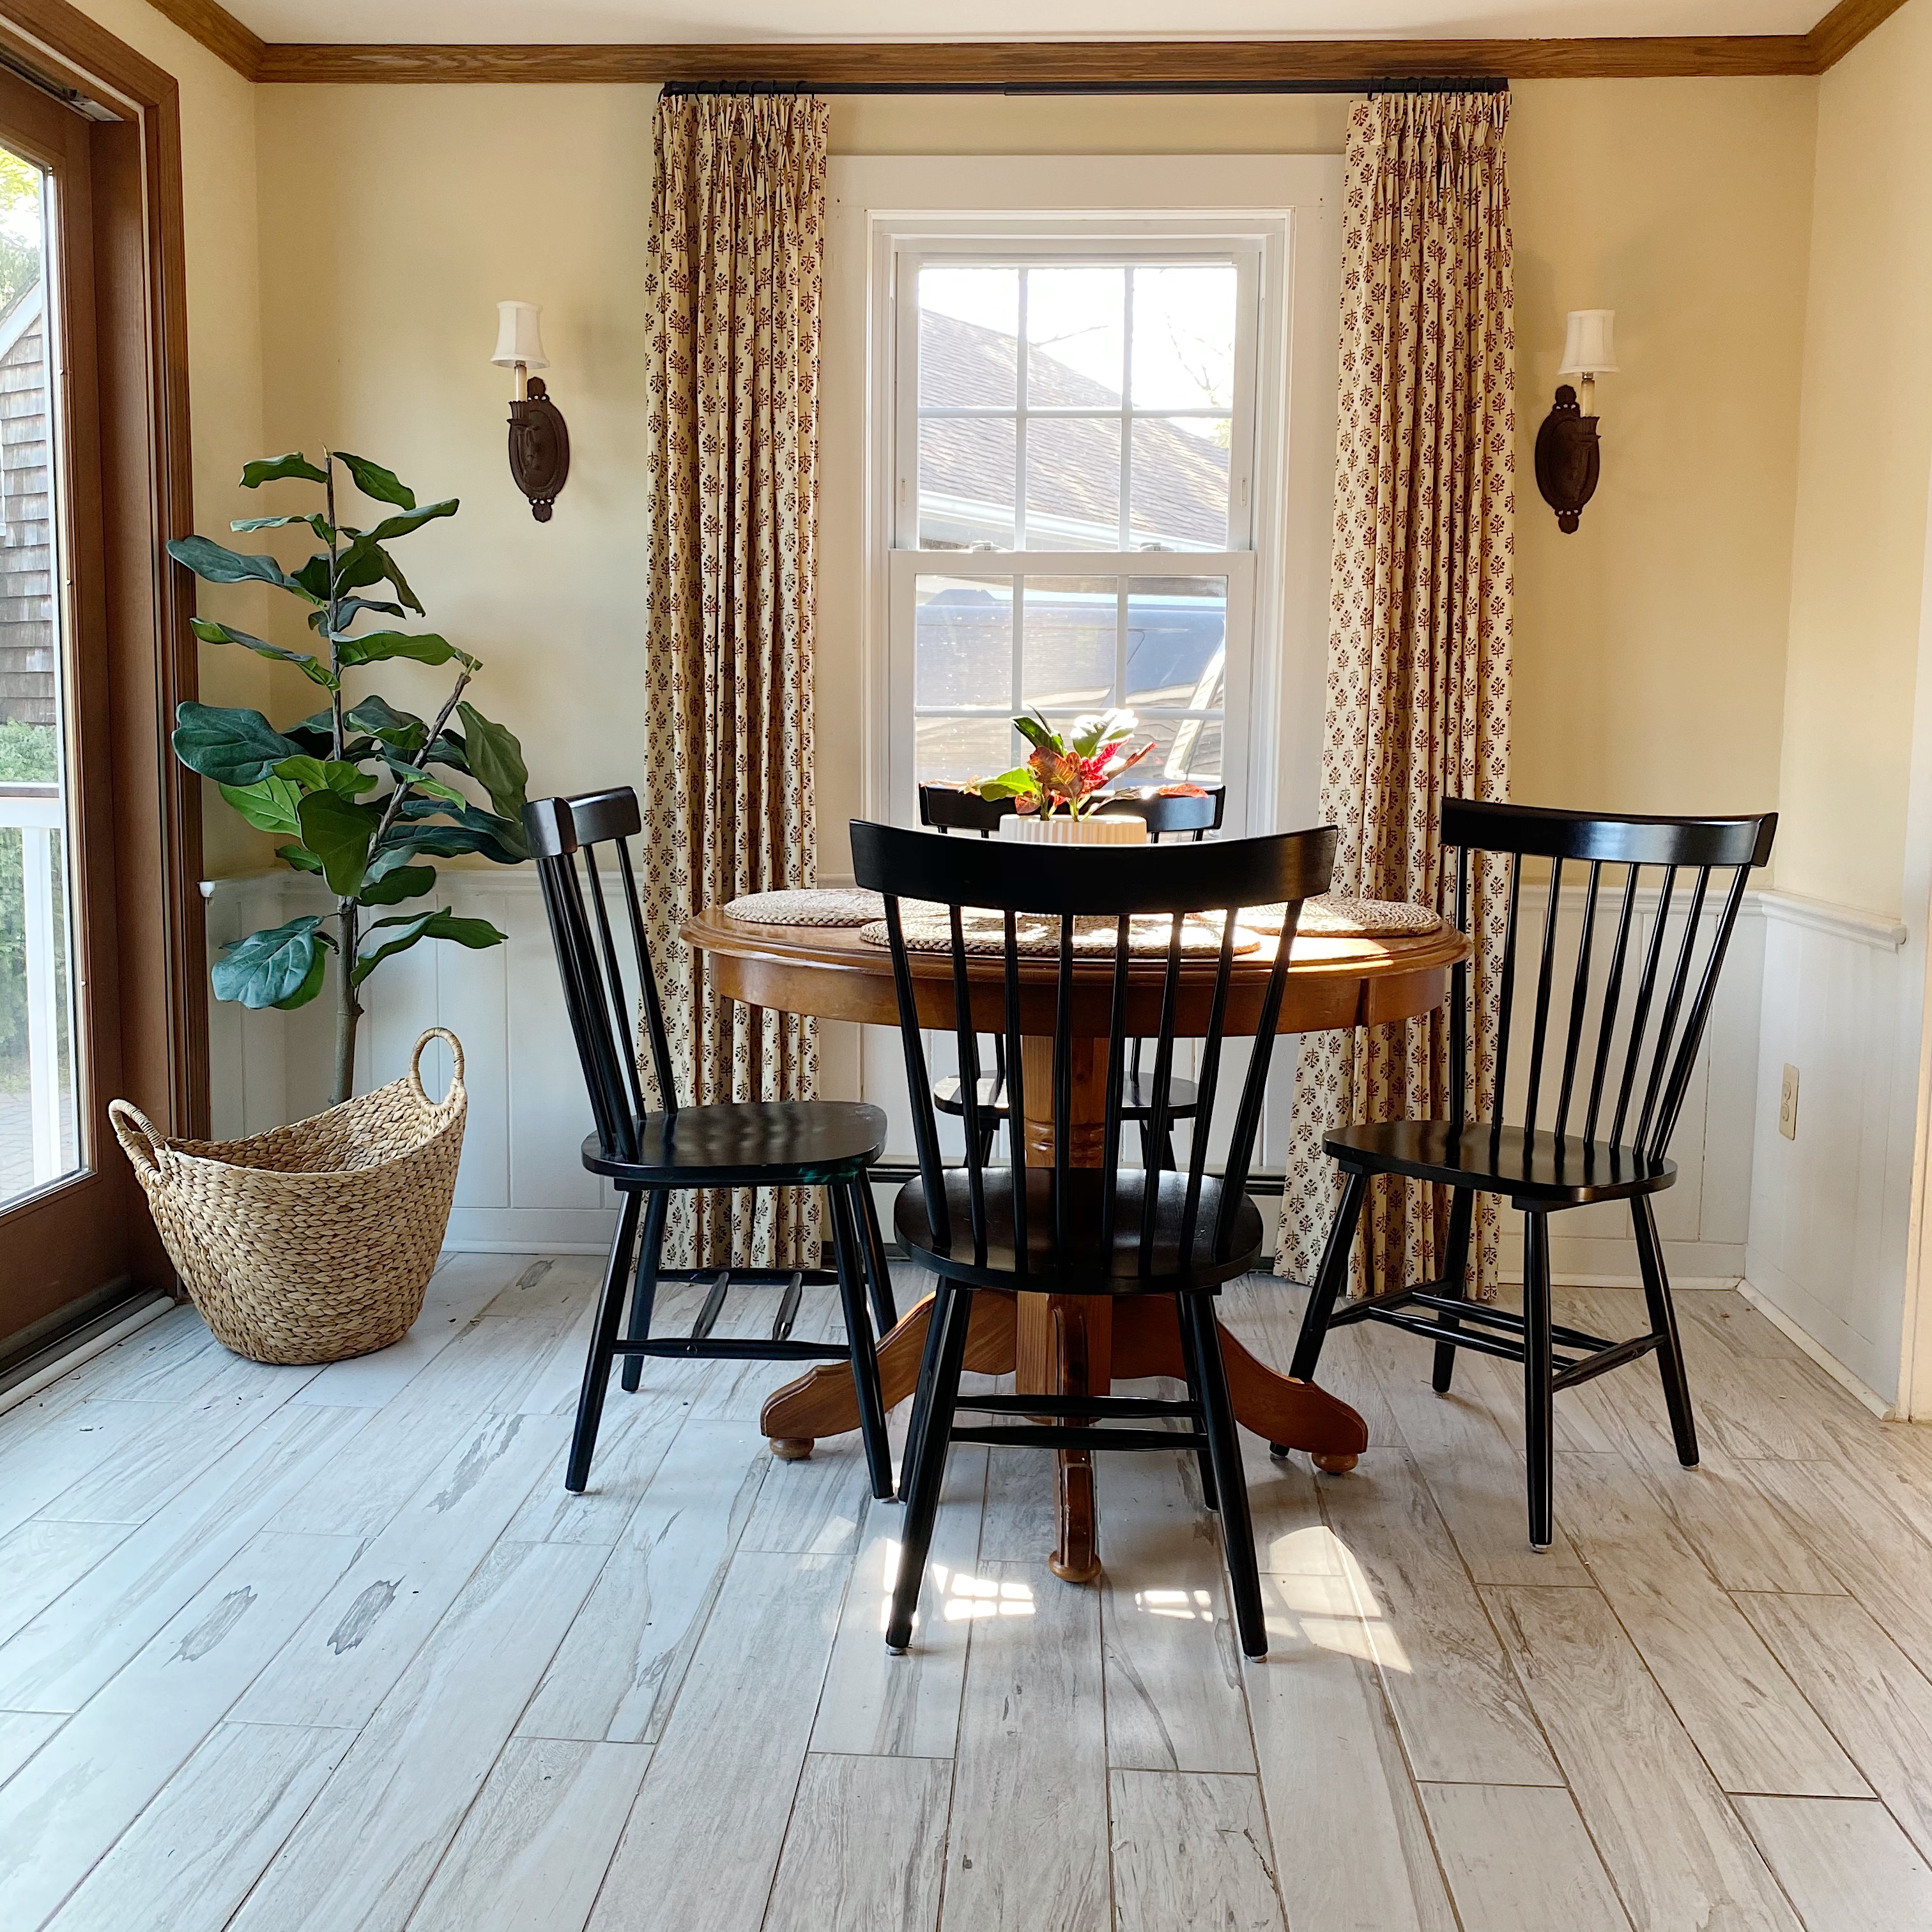 kitchen eating nook with vintage print drapes, pedestal table and black Windsor chairs with white wood tiles floor